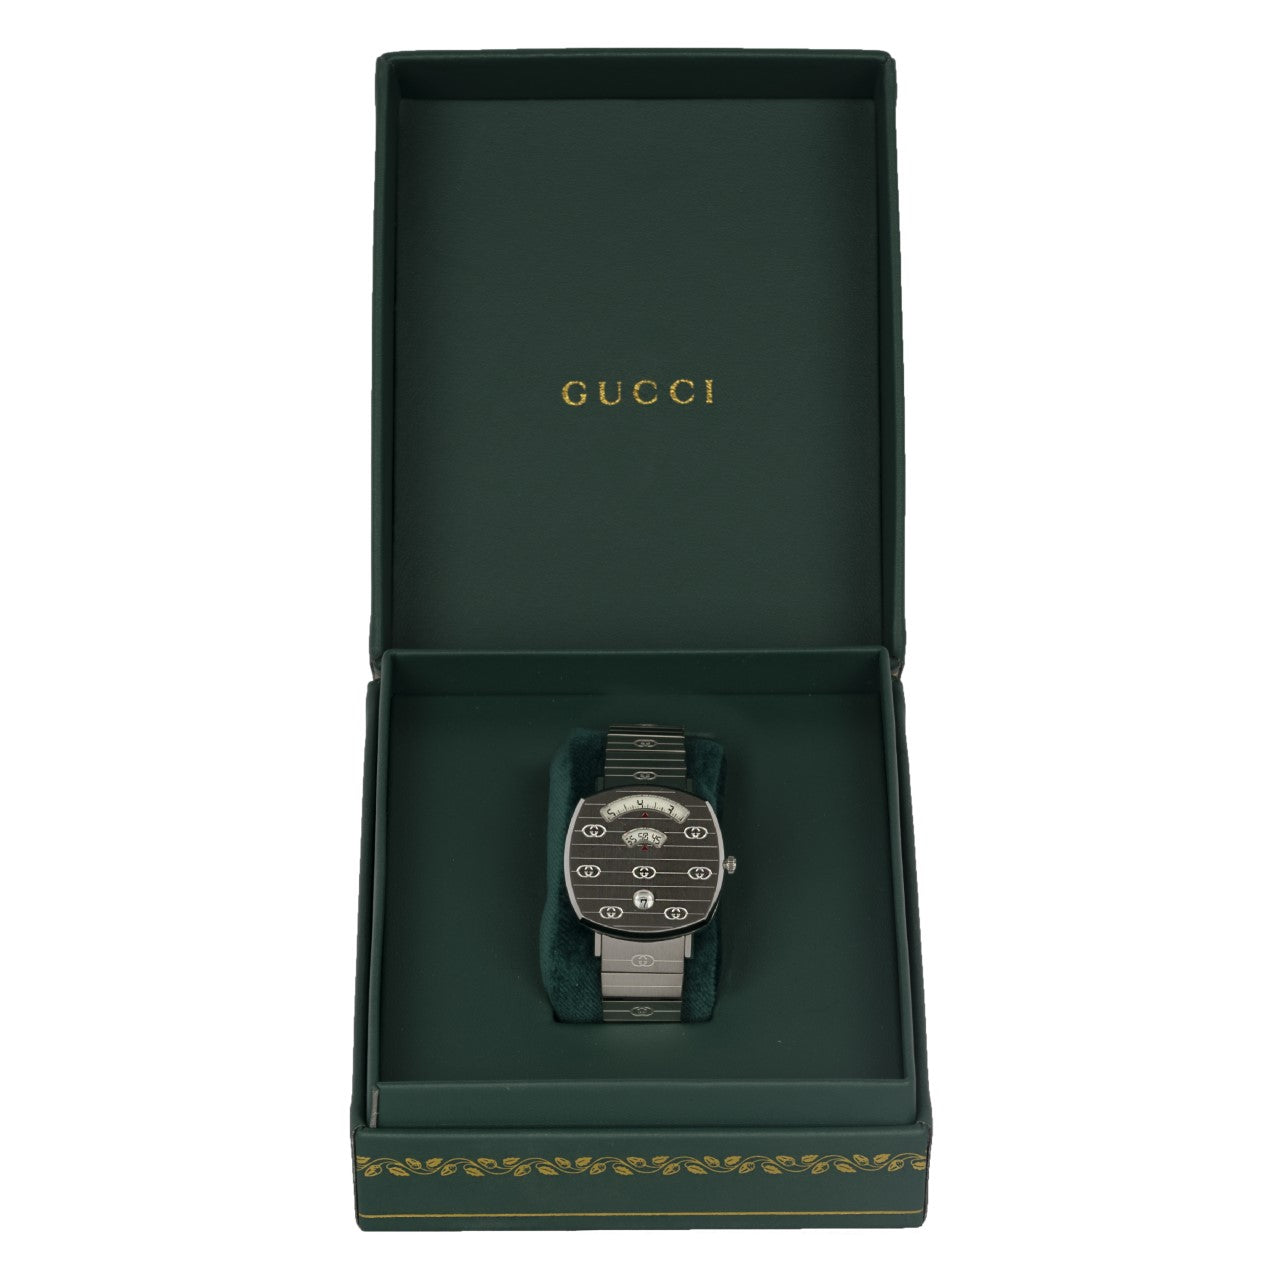 Second hand 27mm Gucci Grip Watch - '20s